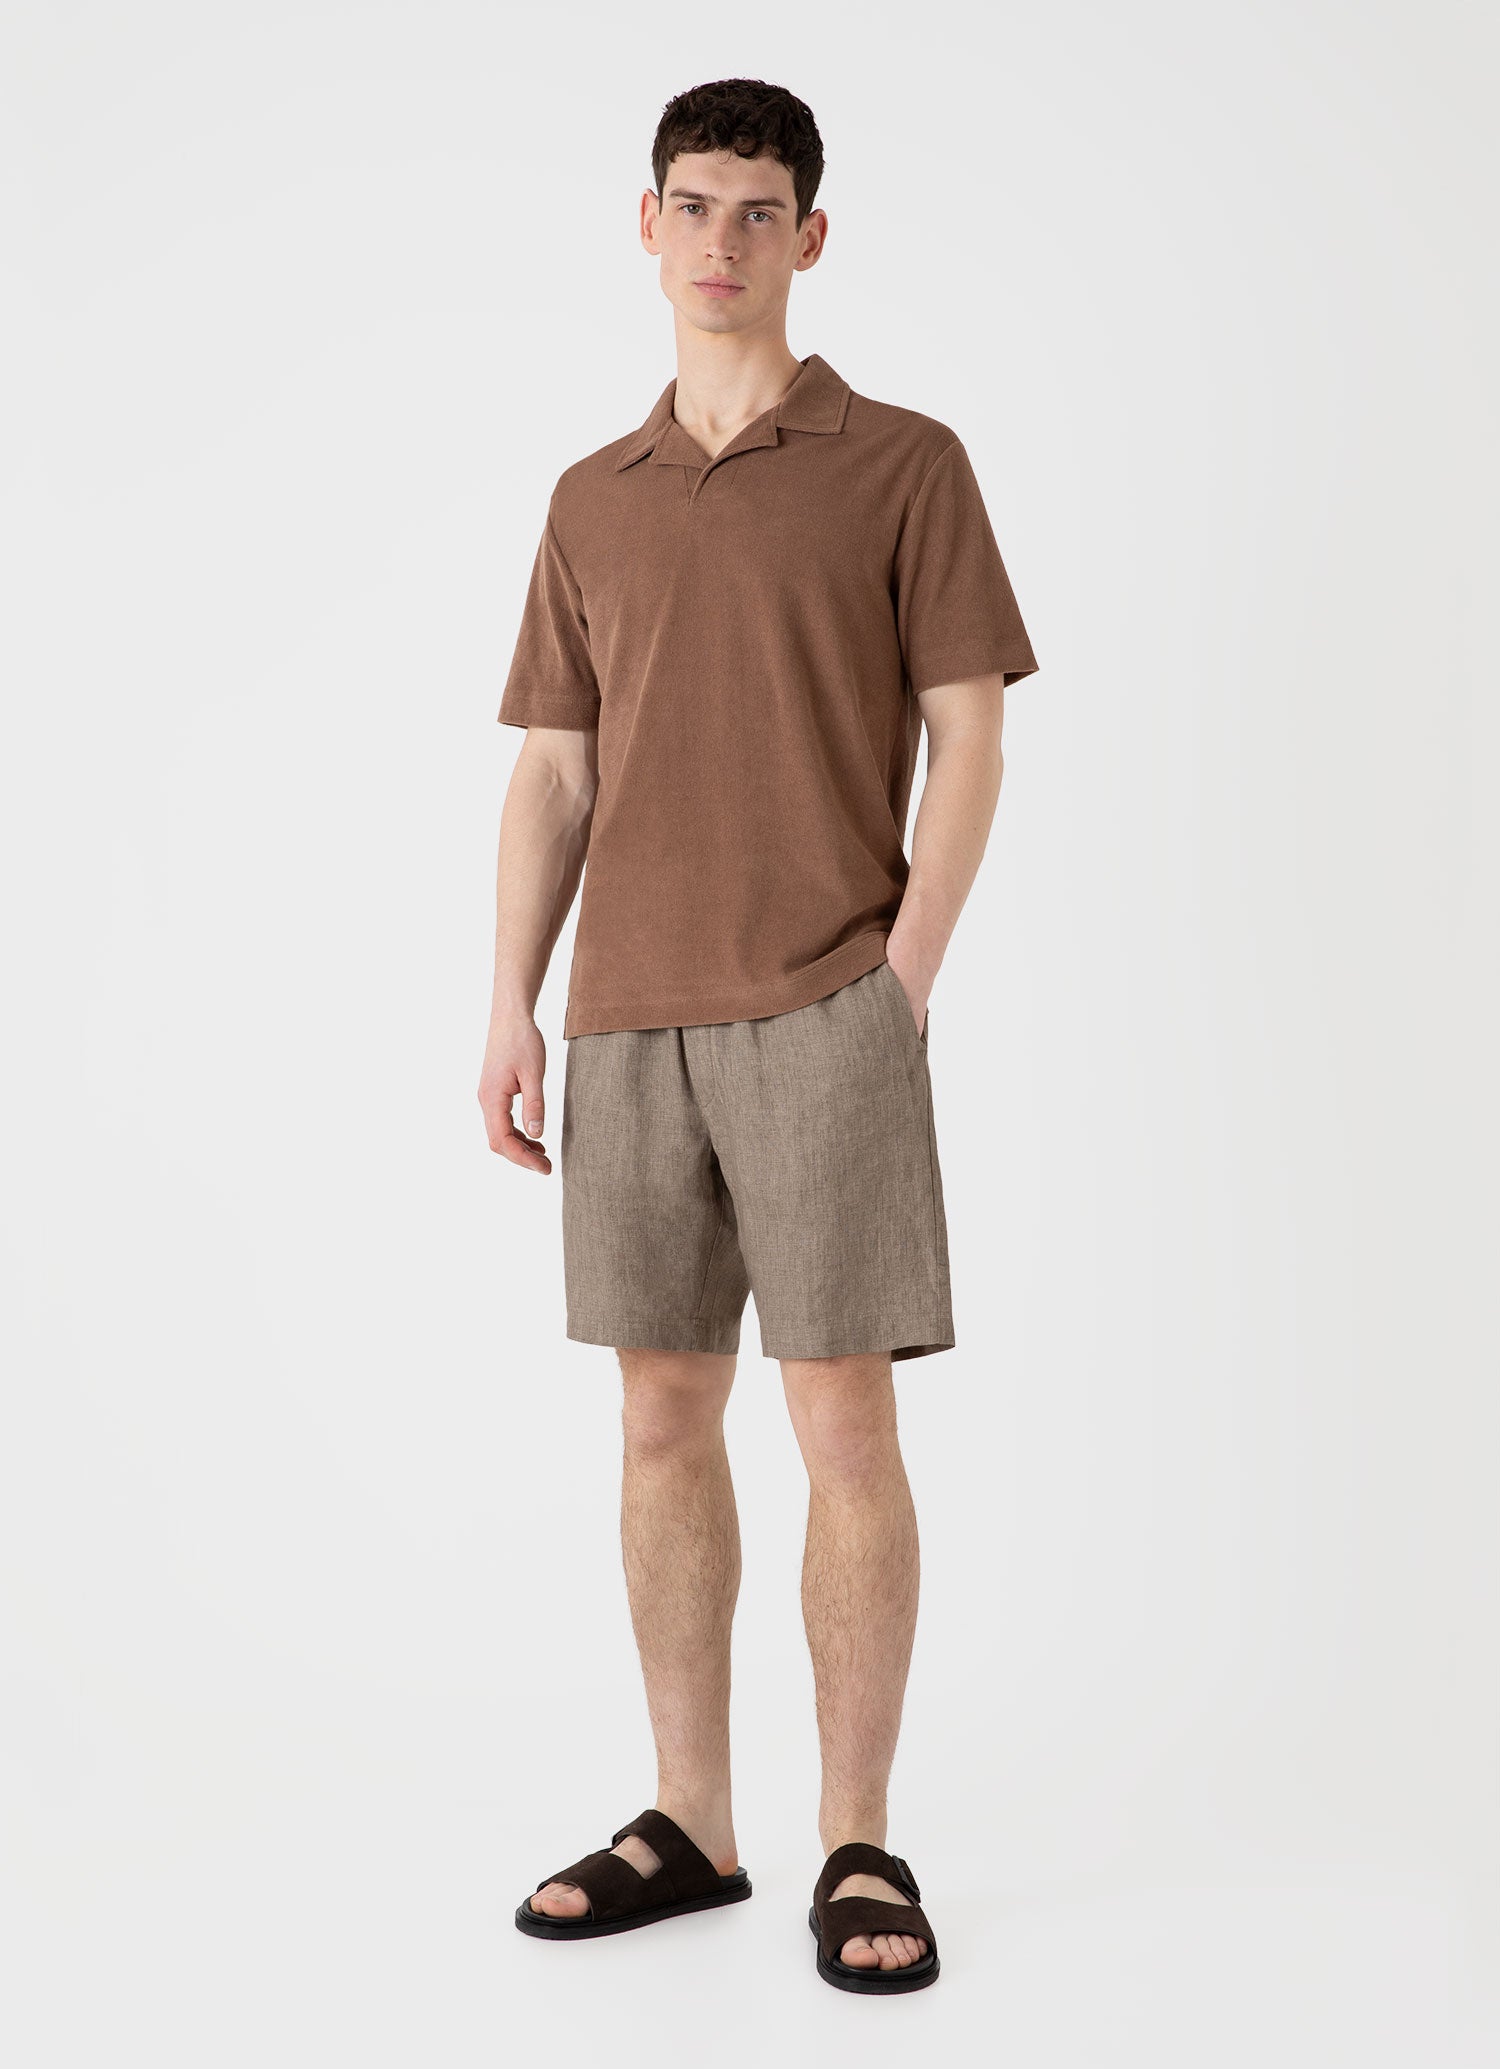 Men's Towelling Polo Shirt in Dark Sand